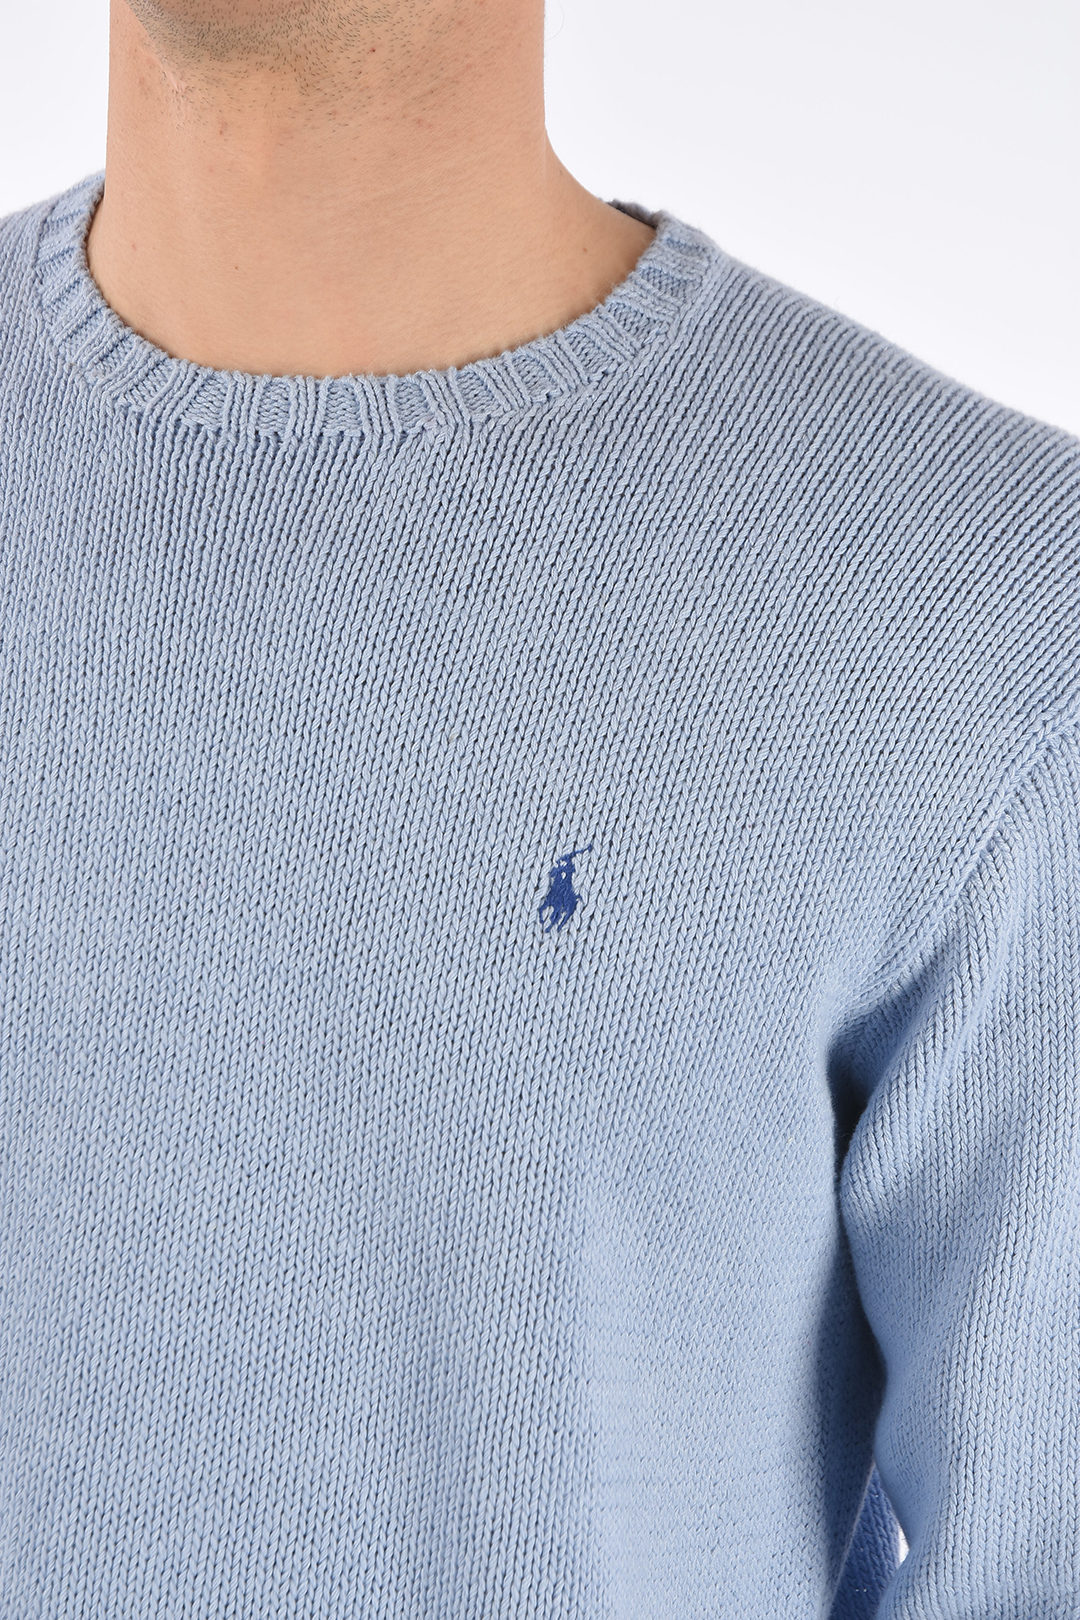 Polo Ralph Lauren Linen and Cotton Cable Knit Sweater men - Glamood Outlet